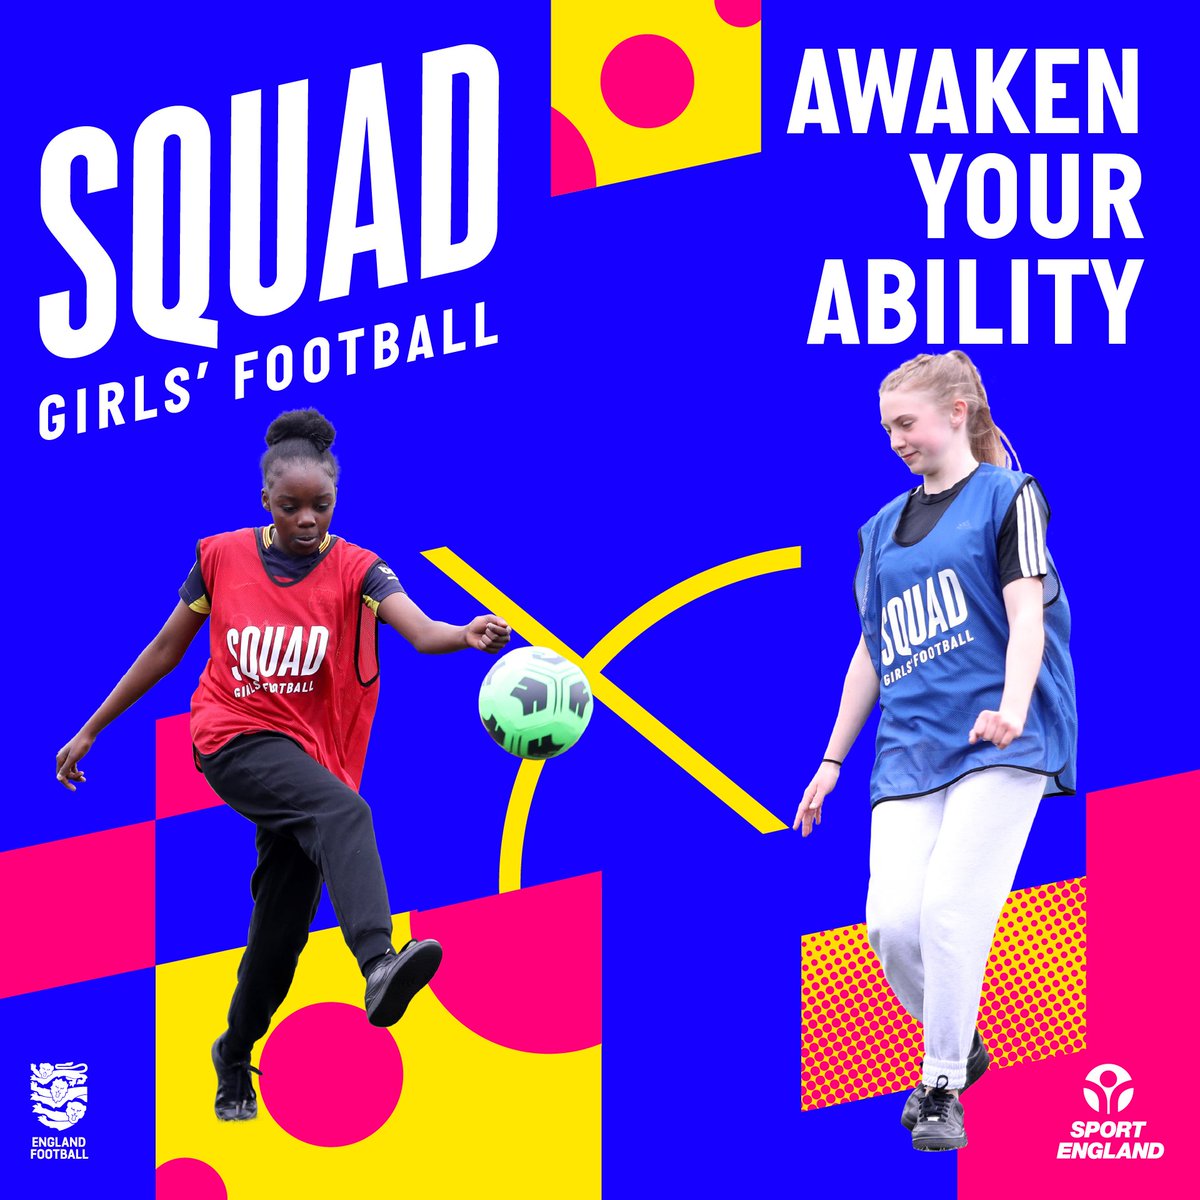 We are proud to have been appointed by the FA as the official provider of the following two dedicated Female football in the community programmes.

Weetabix Wildcats (for 5-11 year olds)
SquadGirls (for 12-14 year olds)

englandfootball.com/play/youth-foo…
englandfootball.com/play/youth-foo…